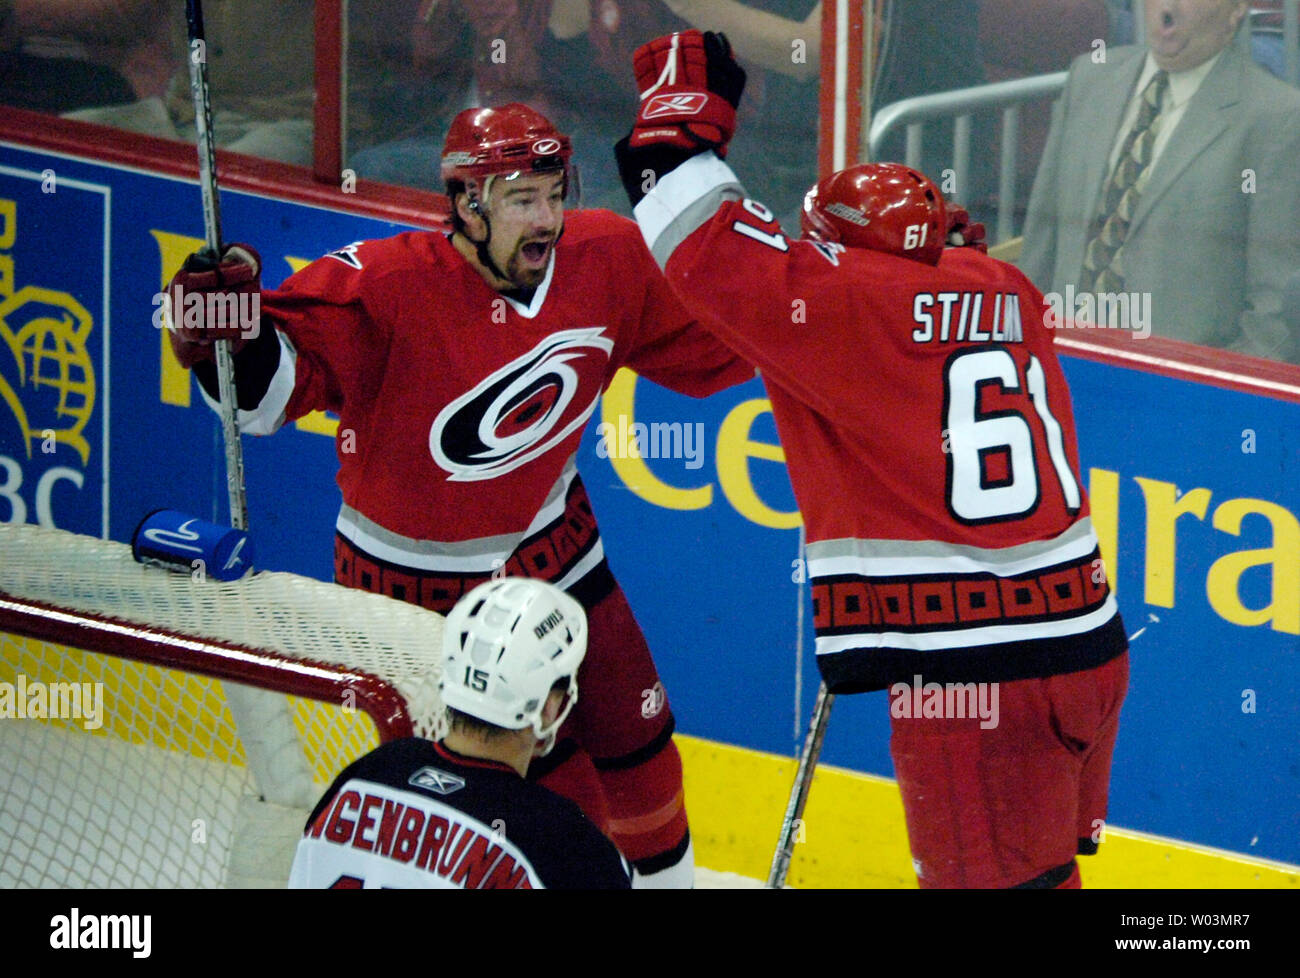 Carolina Hurricanes' Justin Williams, left, skates toward teammate Cory Stillman after Stillman scored against the New Jersey Devils during Game 5 of the NHL Eastern Conference semifinals at the RBC Center in Raleigh, NC May 14, 2006.  Williams was credited with the assist on the goal.  Watching the celebration is New Jersey Devils' Jamie Langenbrunner, bottom.  (UPI Photo/Jeffrey A. Camarati) Stock Photo